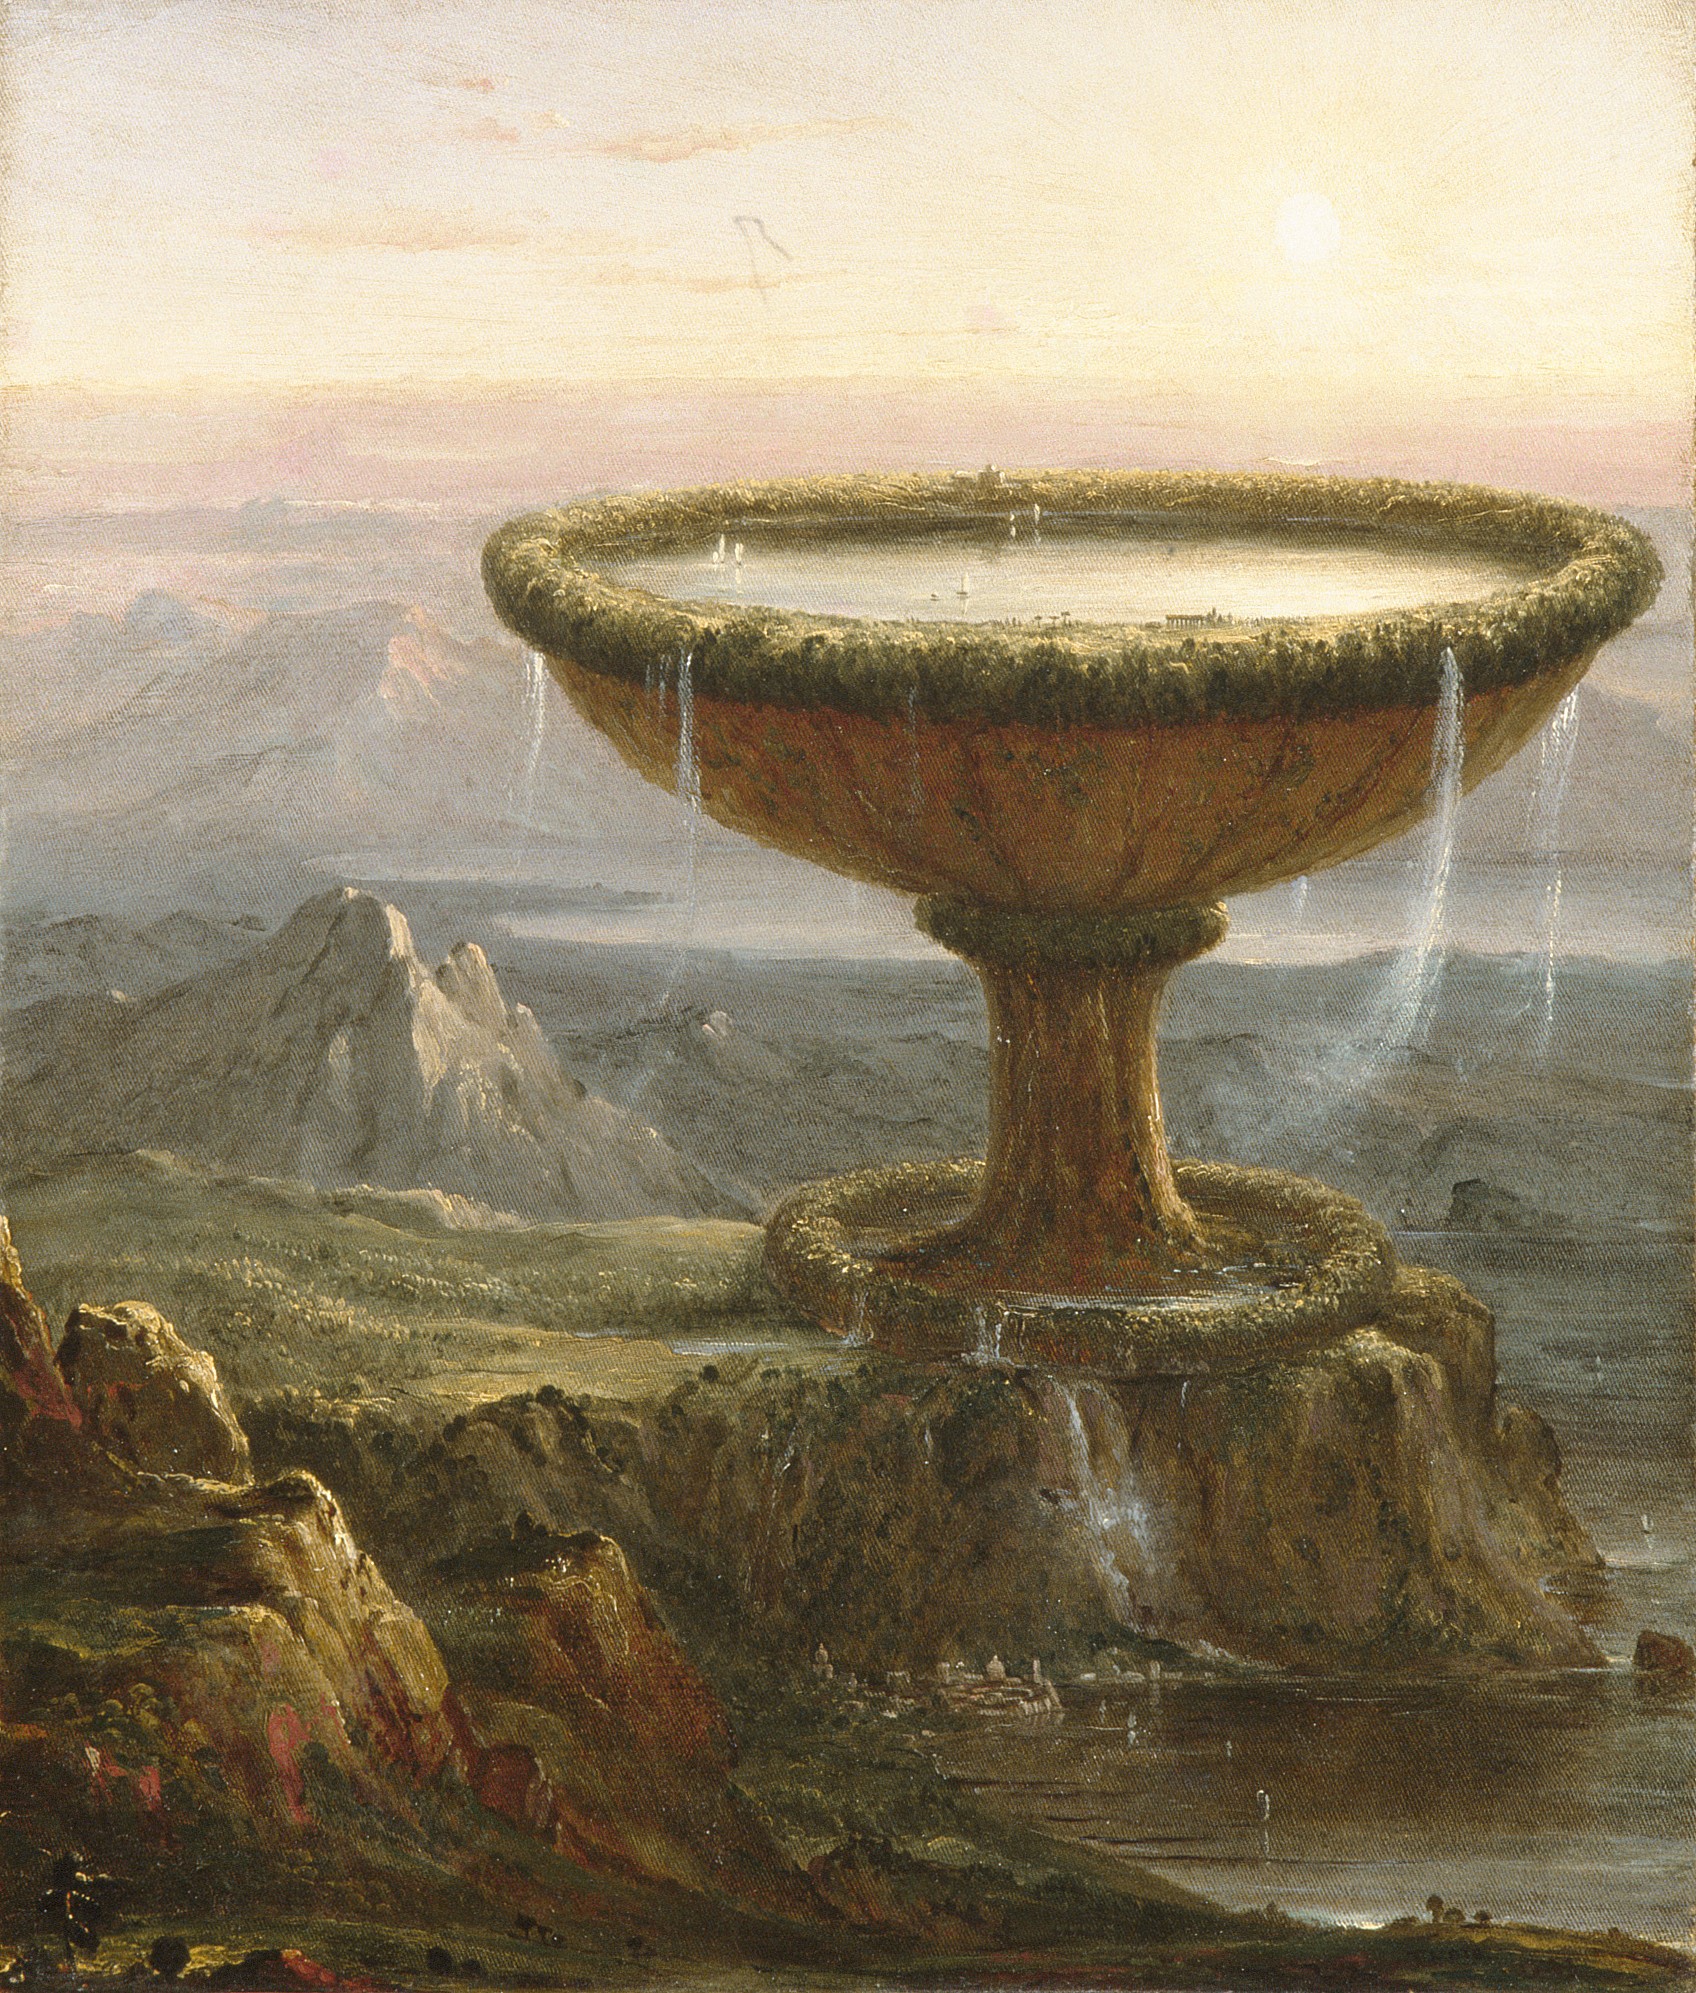 http://artpaintingartist.org/wp-content/uploads/2014/02/The-Titans-Goblet-by-Thomas-Cole.jpg